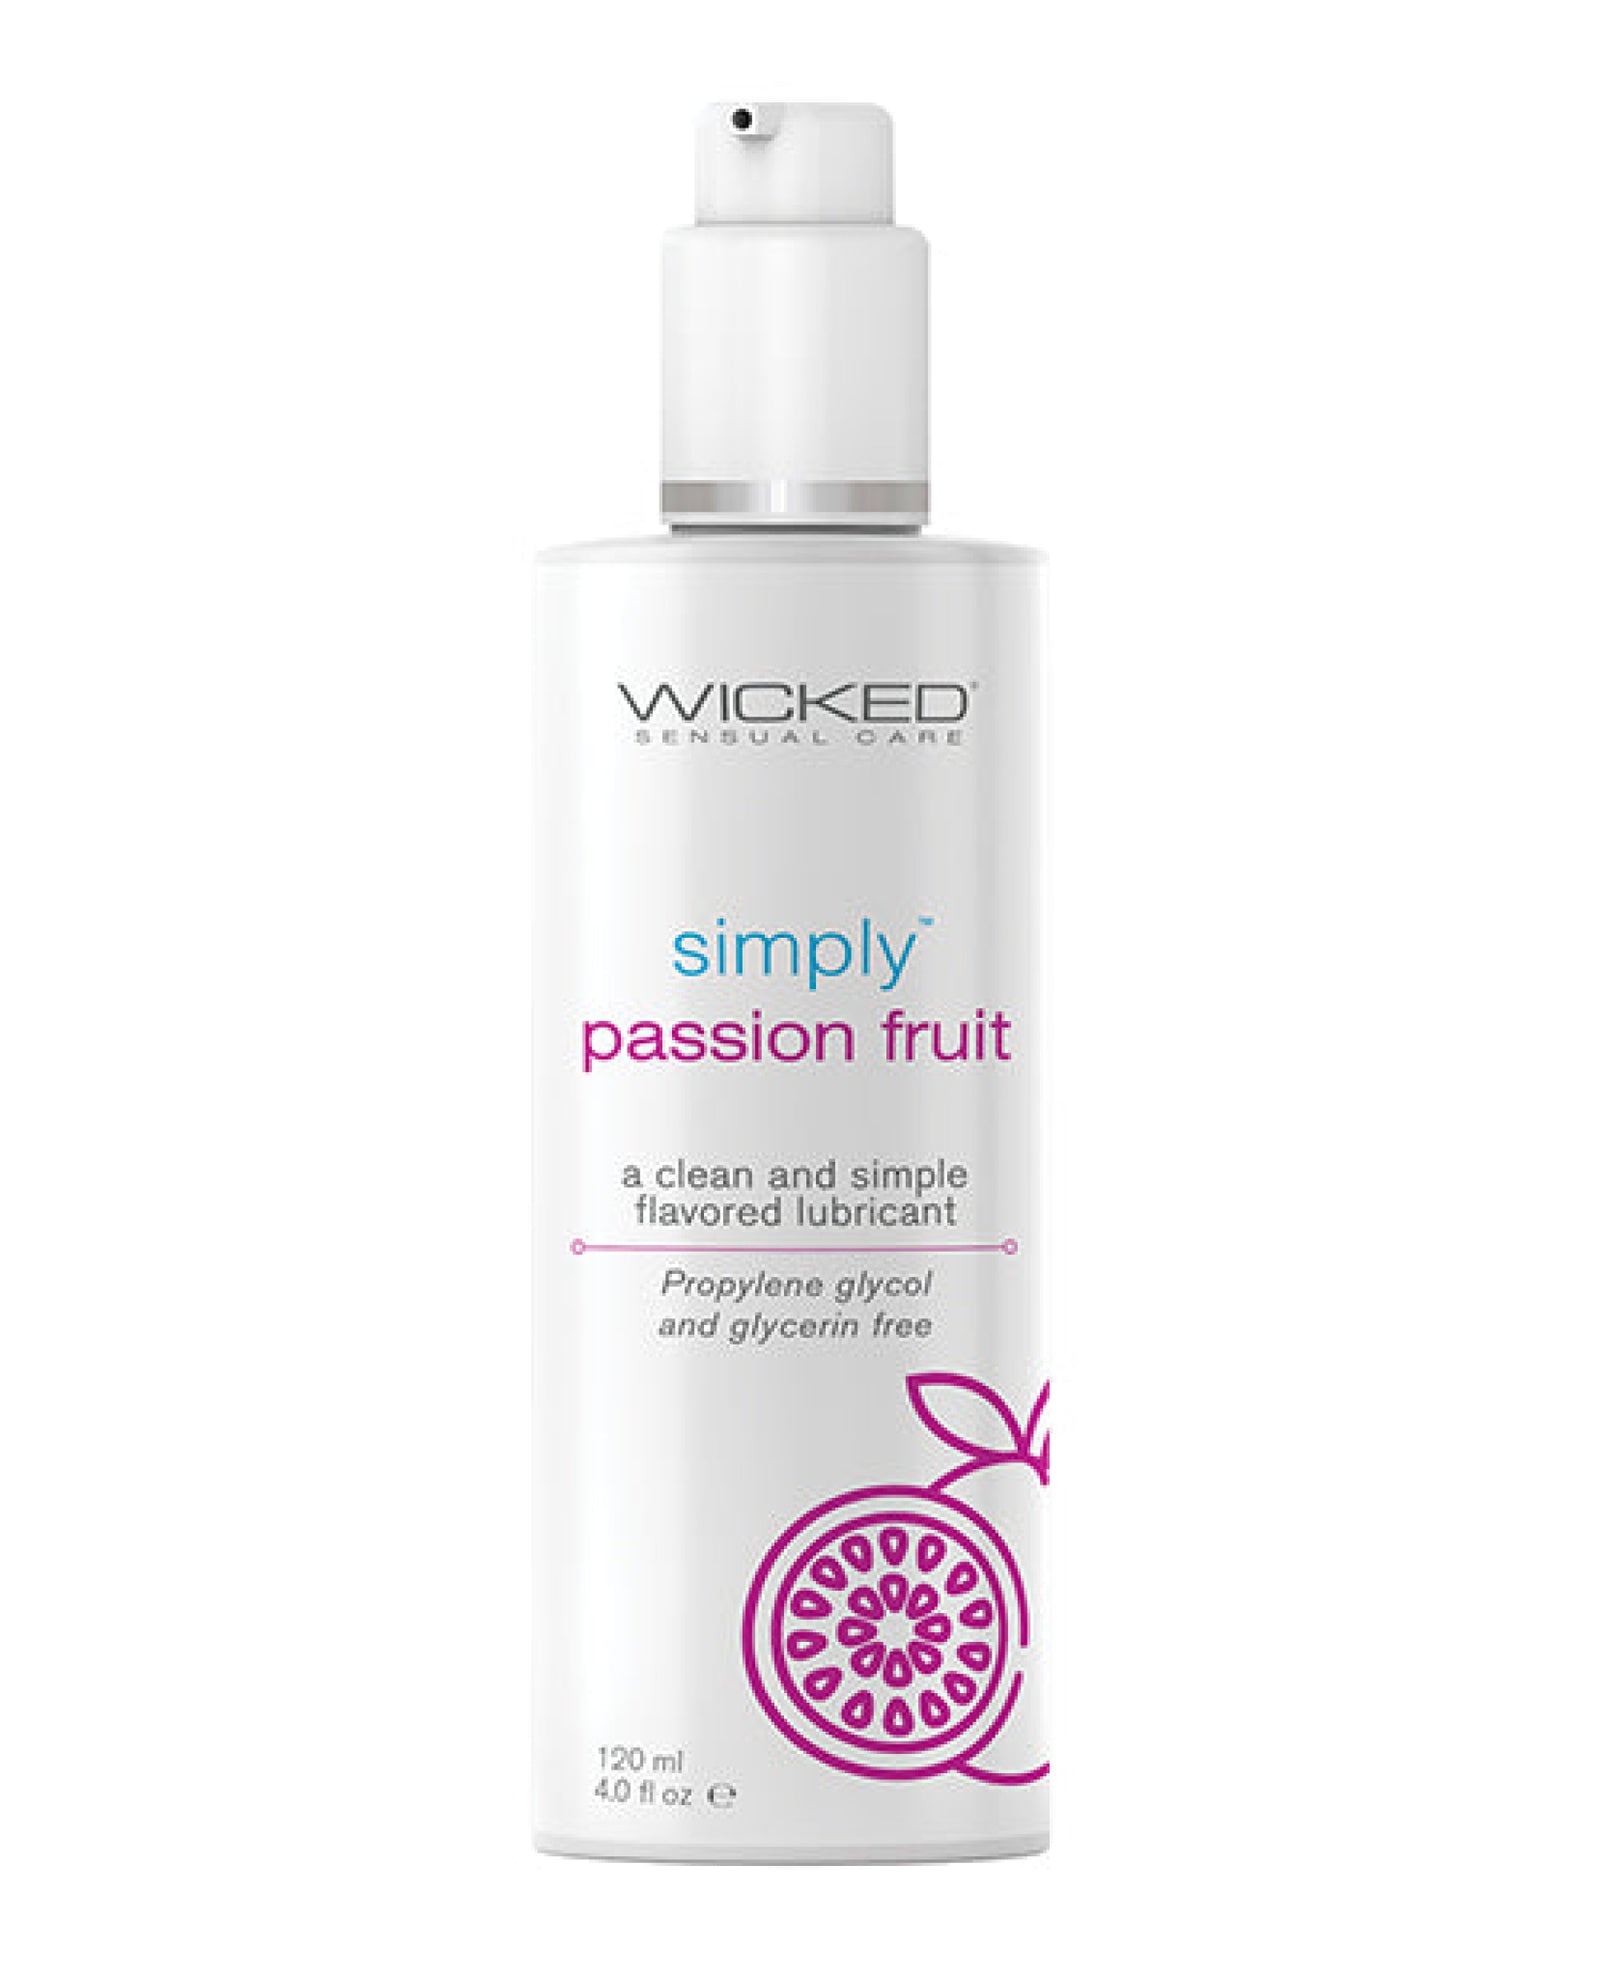 Wicked Sensual Care Simply Water Based Lubricant - 4 Oz Wicked Sensual Care